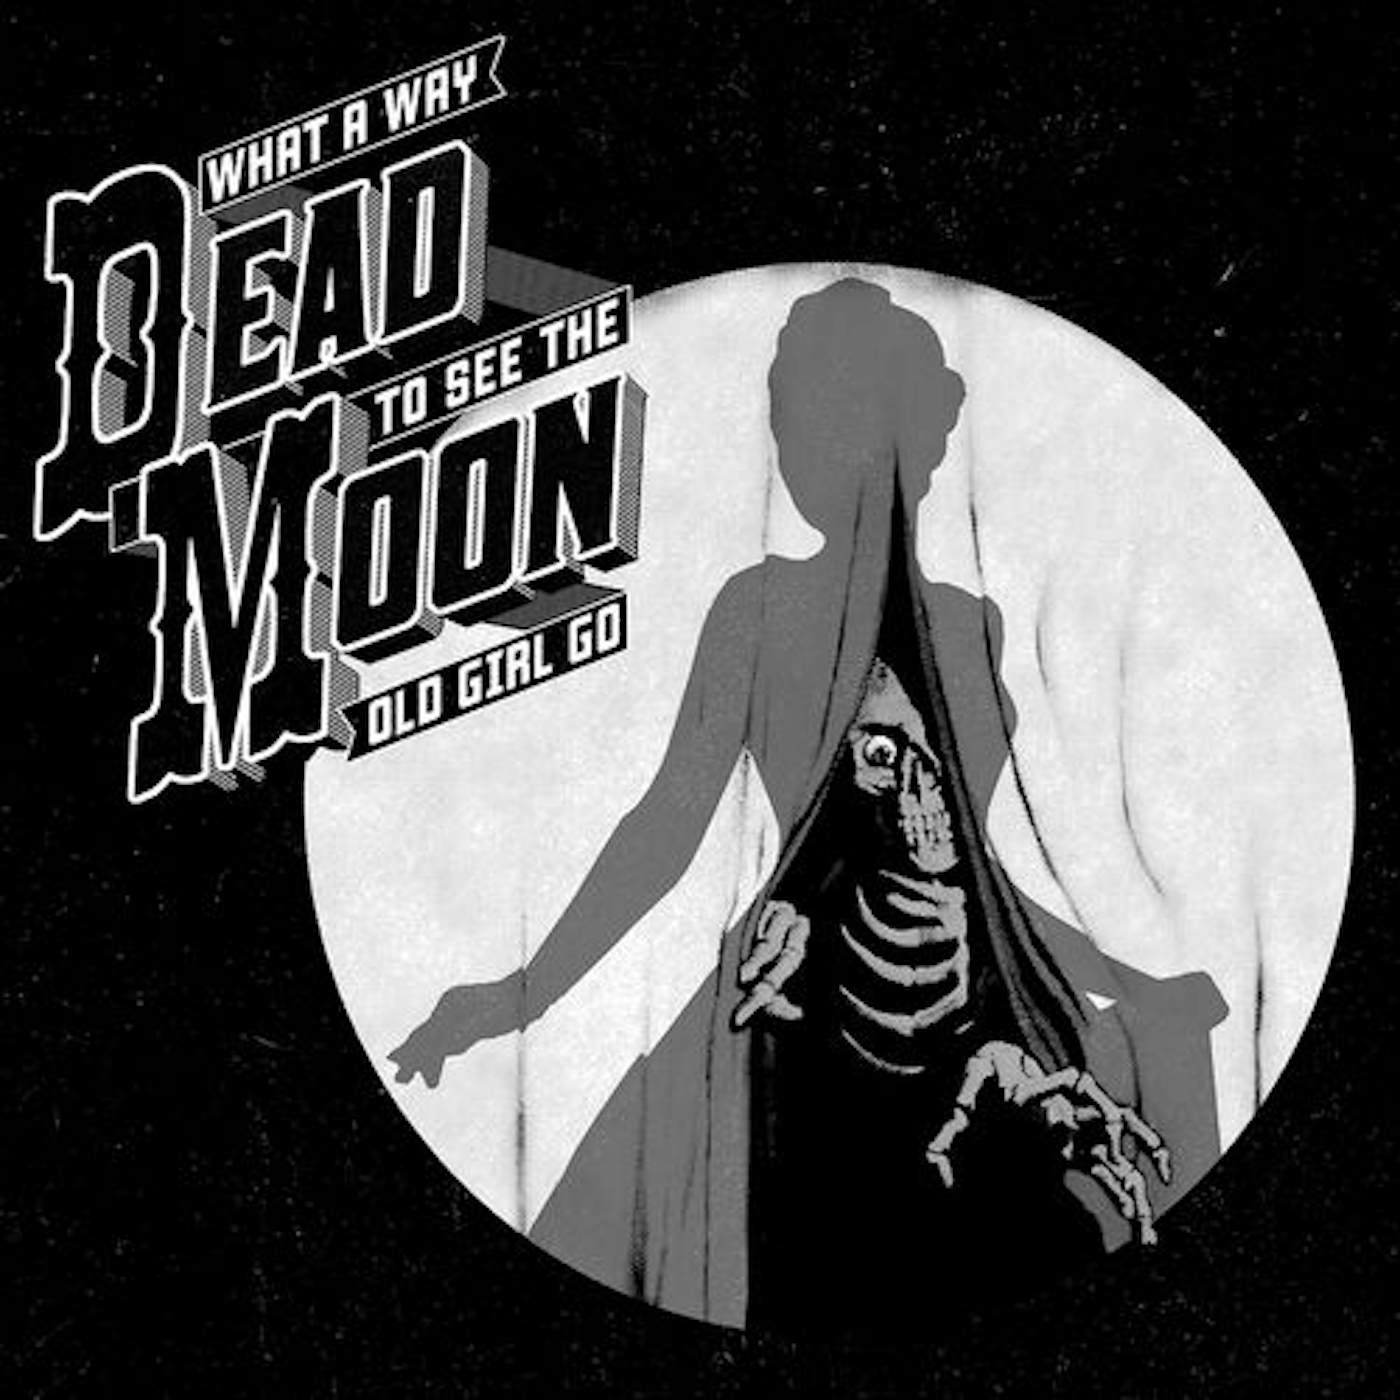 Dead Moon What A Way To See The Old Girl Go Vinyl Record